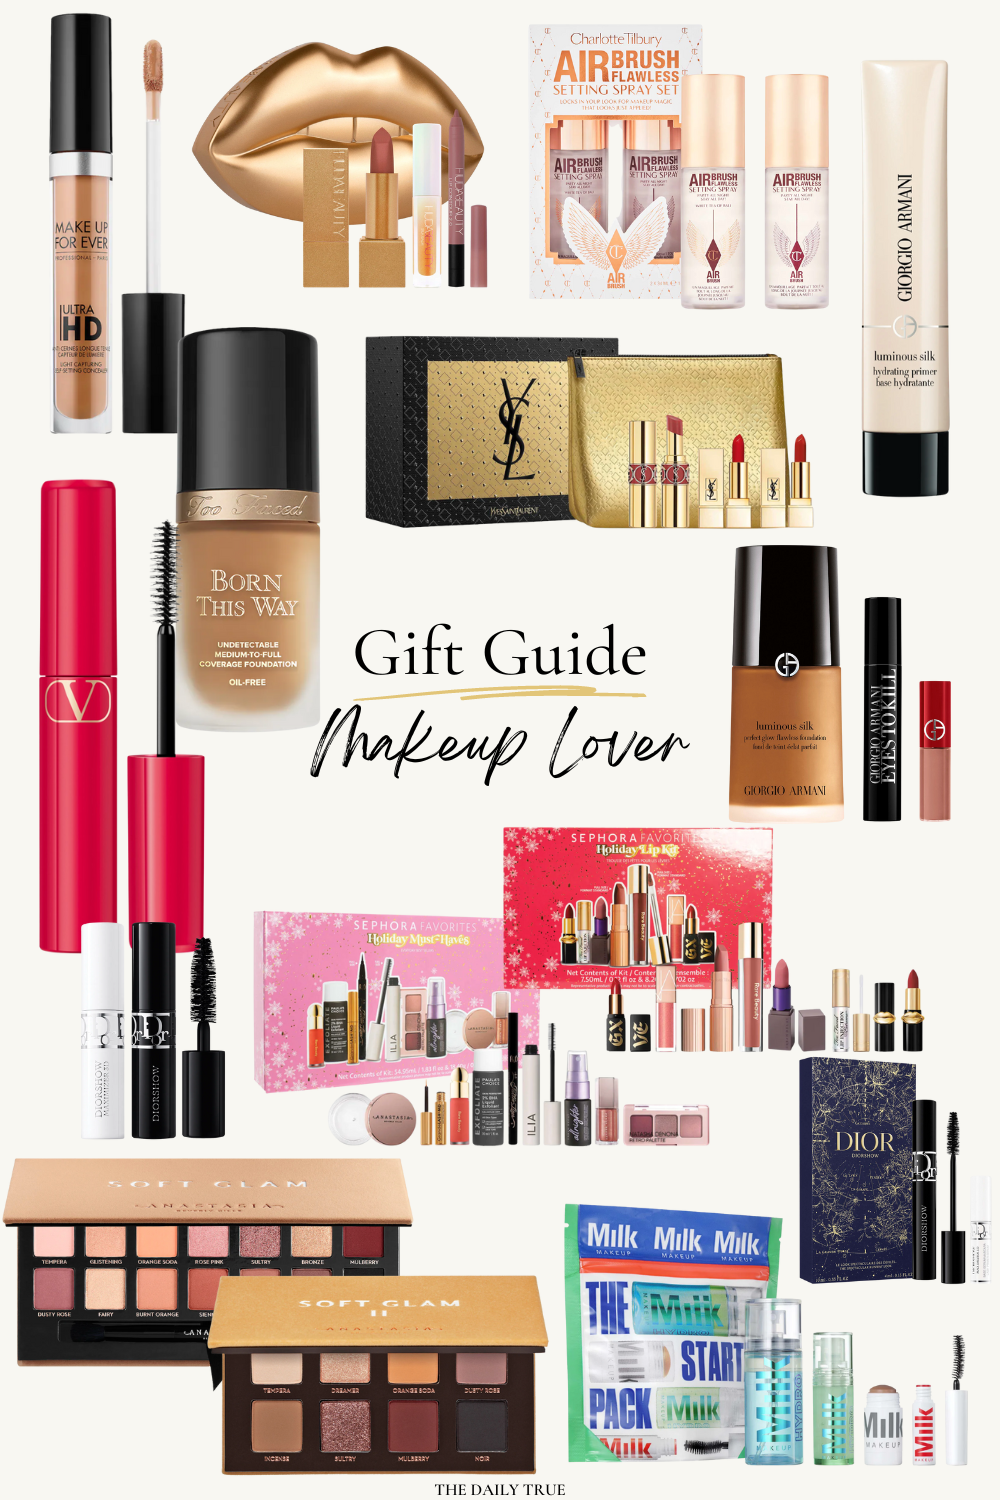 These are the Best Gifts for Beauty Lovers